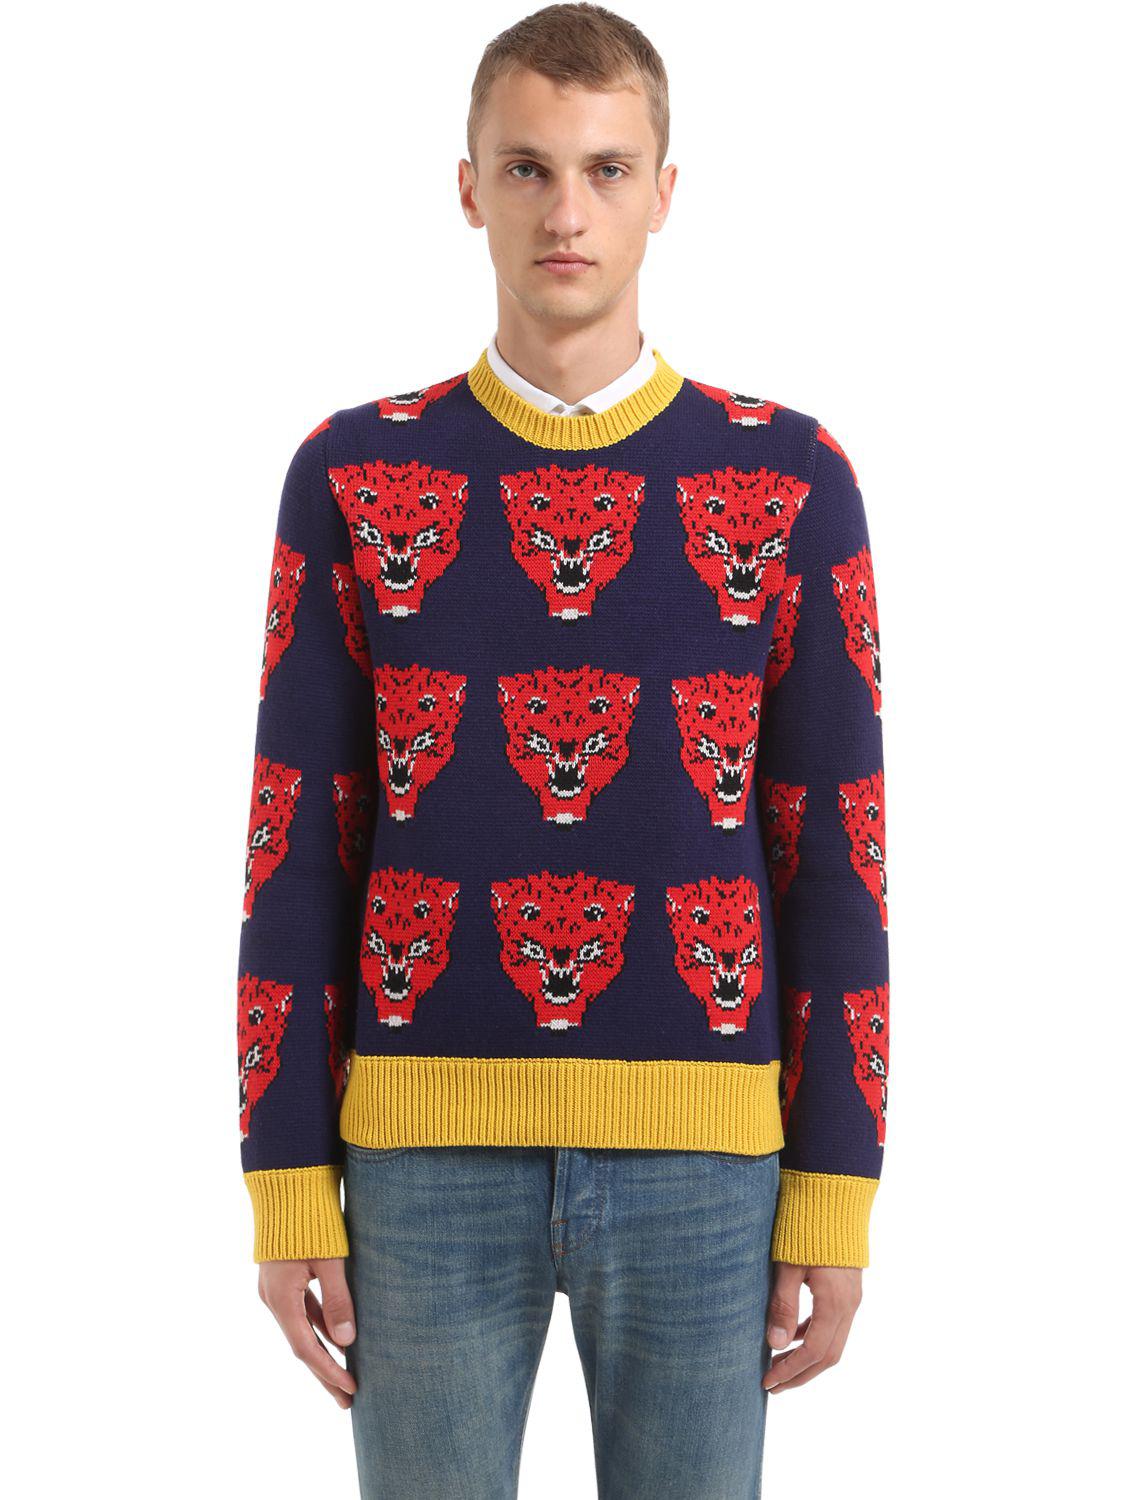 Gucci Tigers Wool Jacquard Knit Sweater in Blue / Red / Yellow (Blue